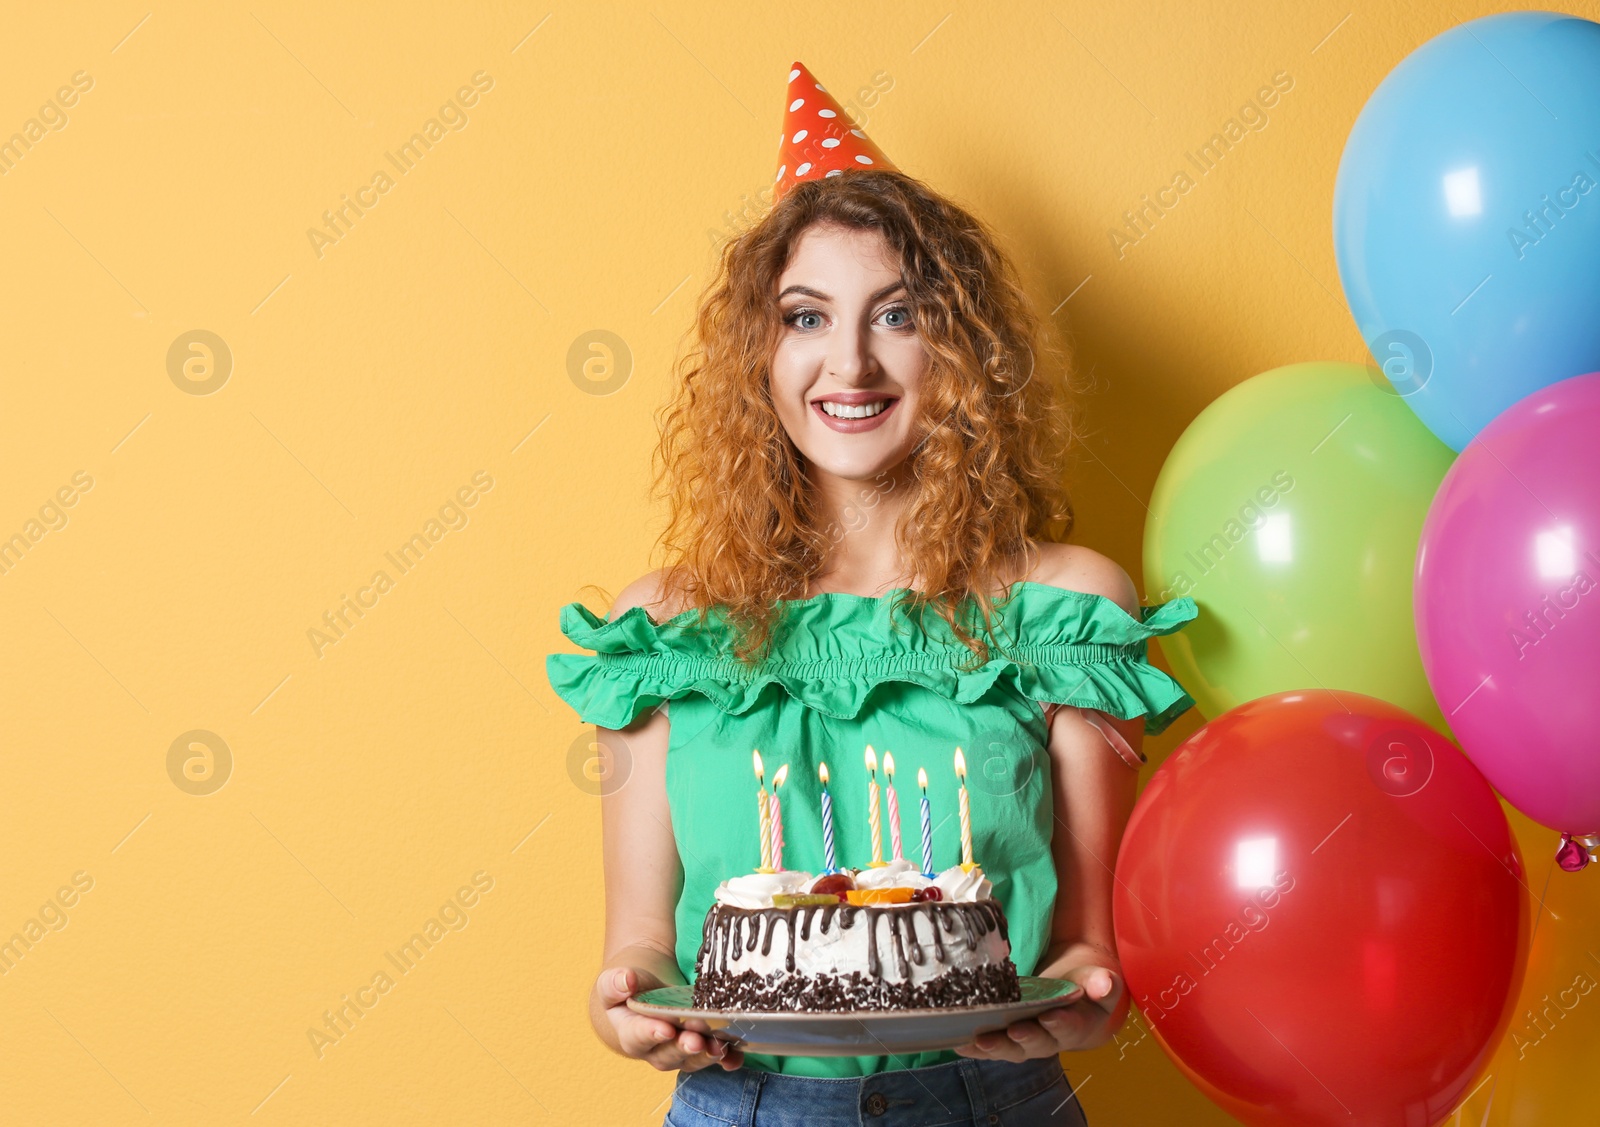 Photo of Young woman with birthday cake near bright balloons on color background